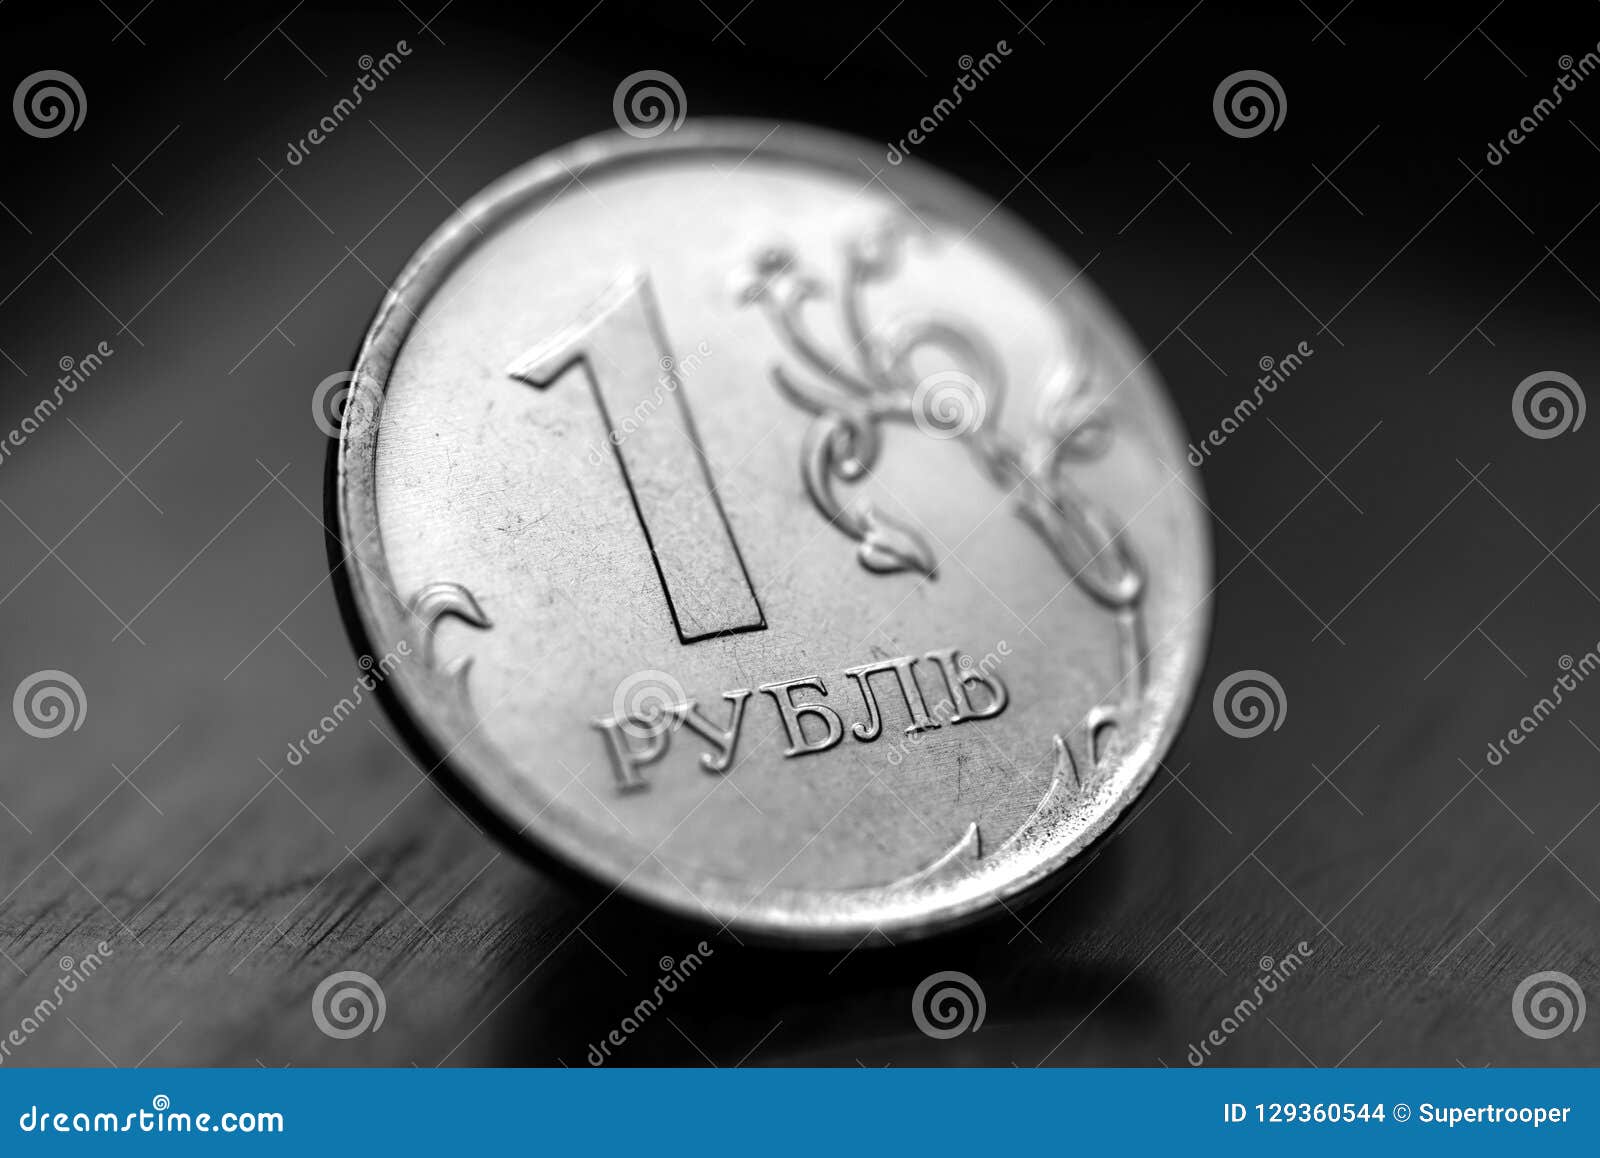 Ruble Coin Close Up stock photo. Image of capital, market ...